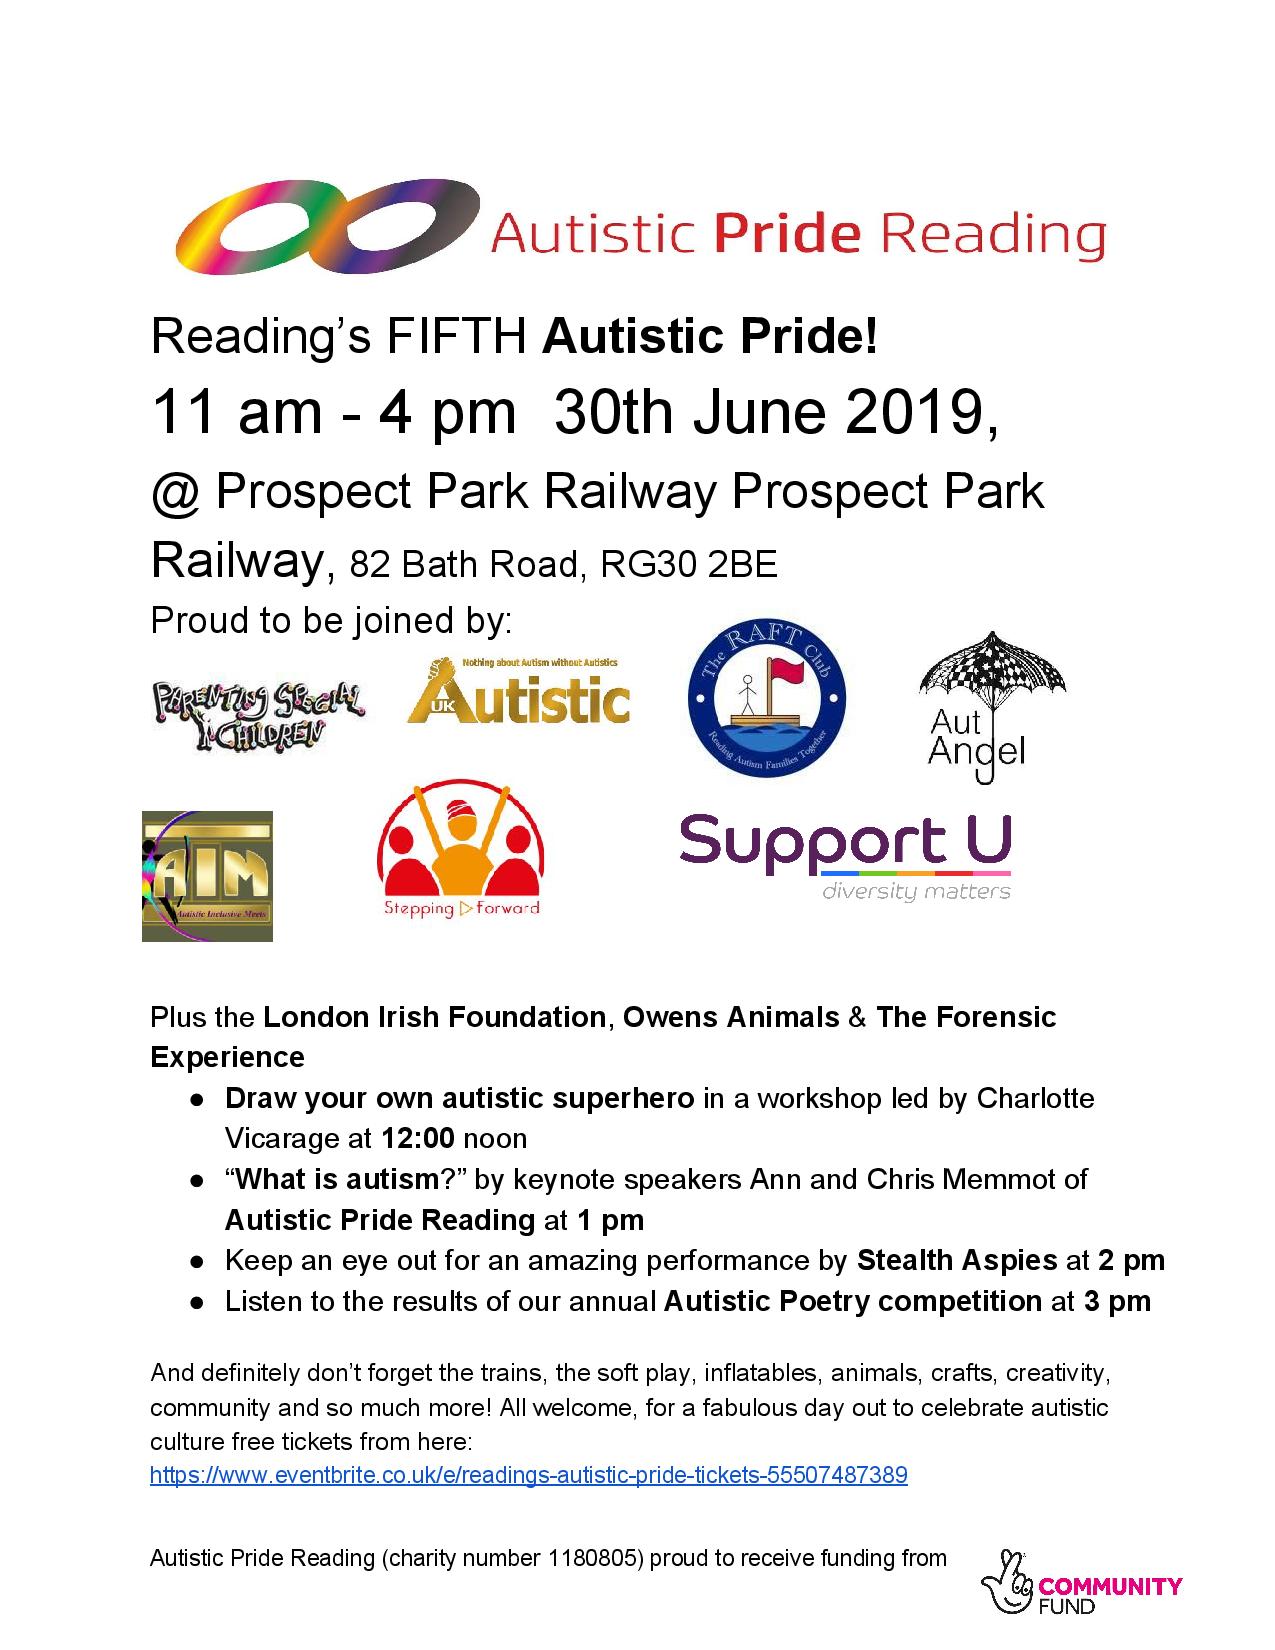 Autistic Pride Reading's 5 th year - ceebrating with Parenting Spcial children, Stepping Forward, RAFT, Stealth Aspies, Key note speach by an and CHris Memmot, POetry compeition results, London Irish Rugby, Infltables